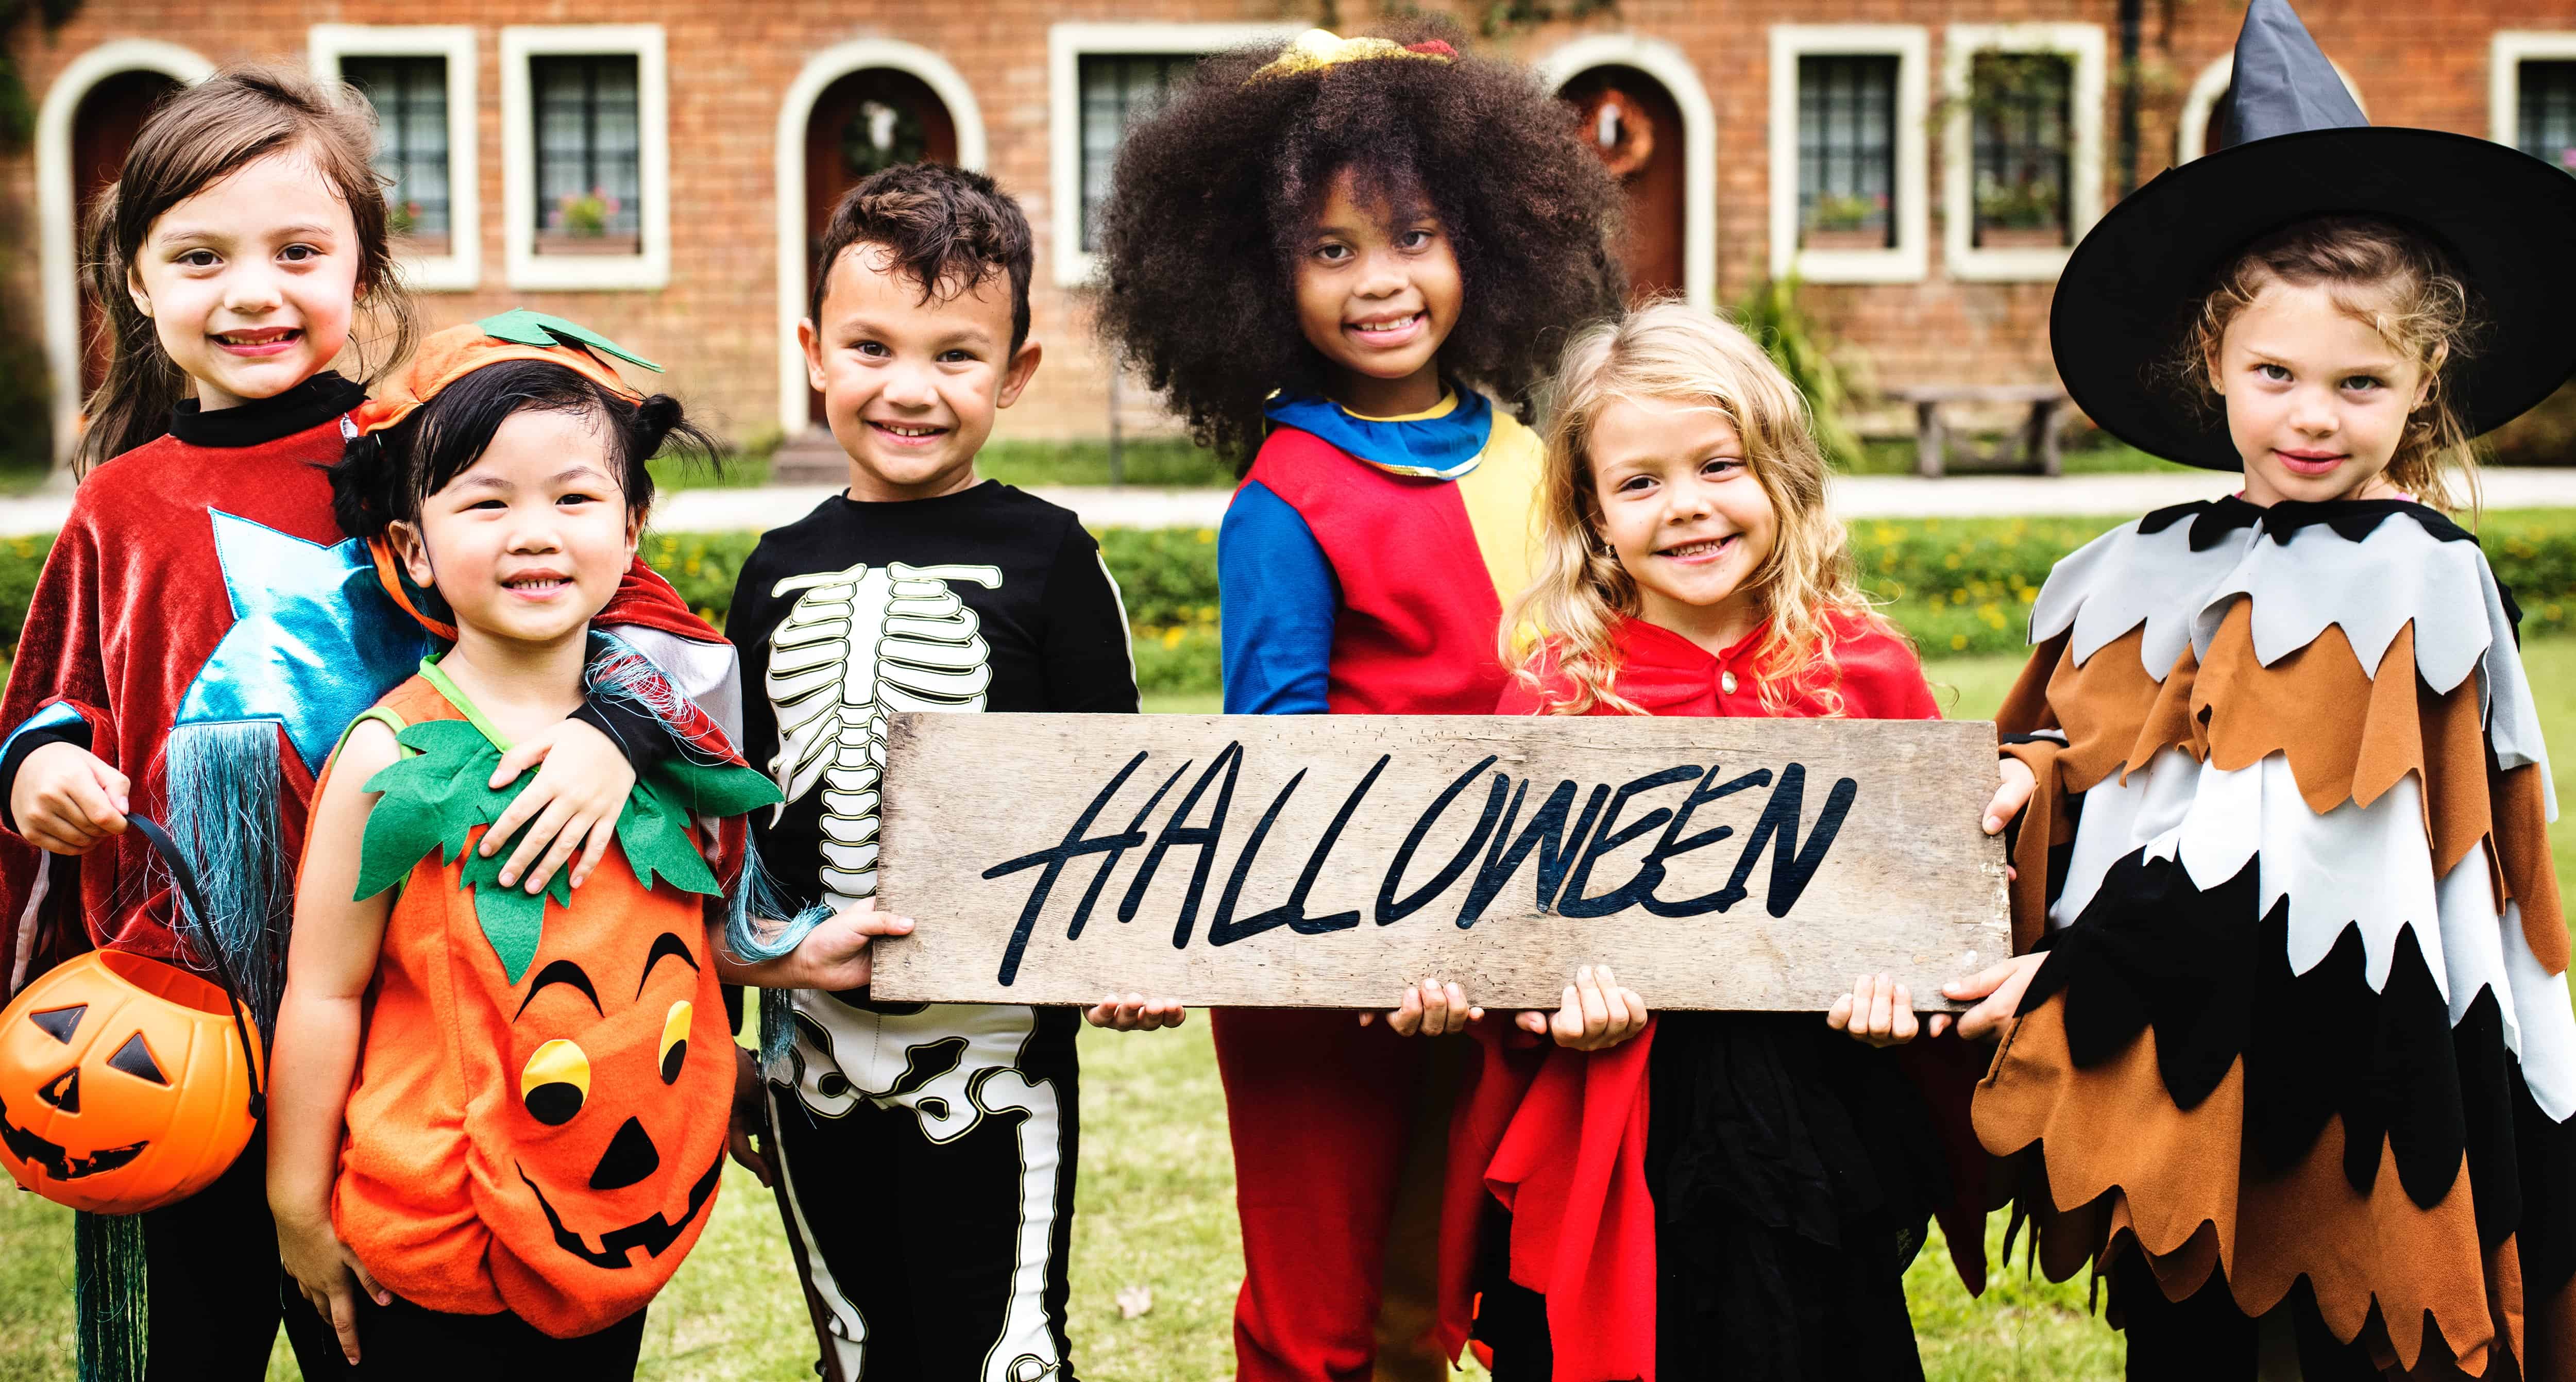 The Most Popular Kids Halloween Costumes for 2019